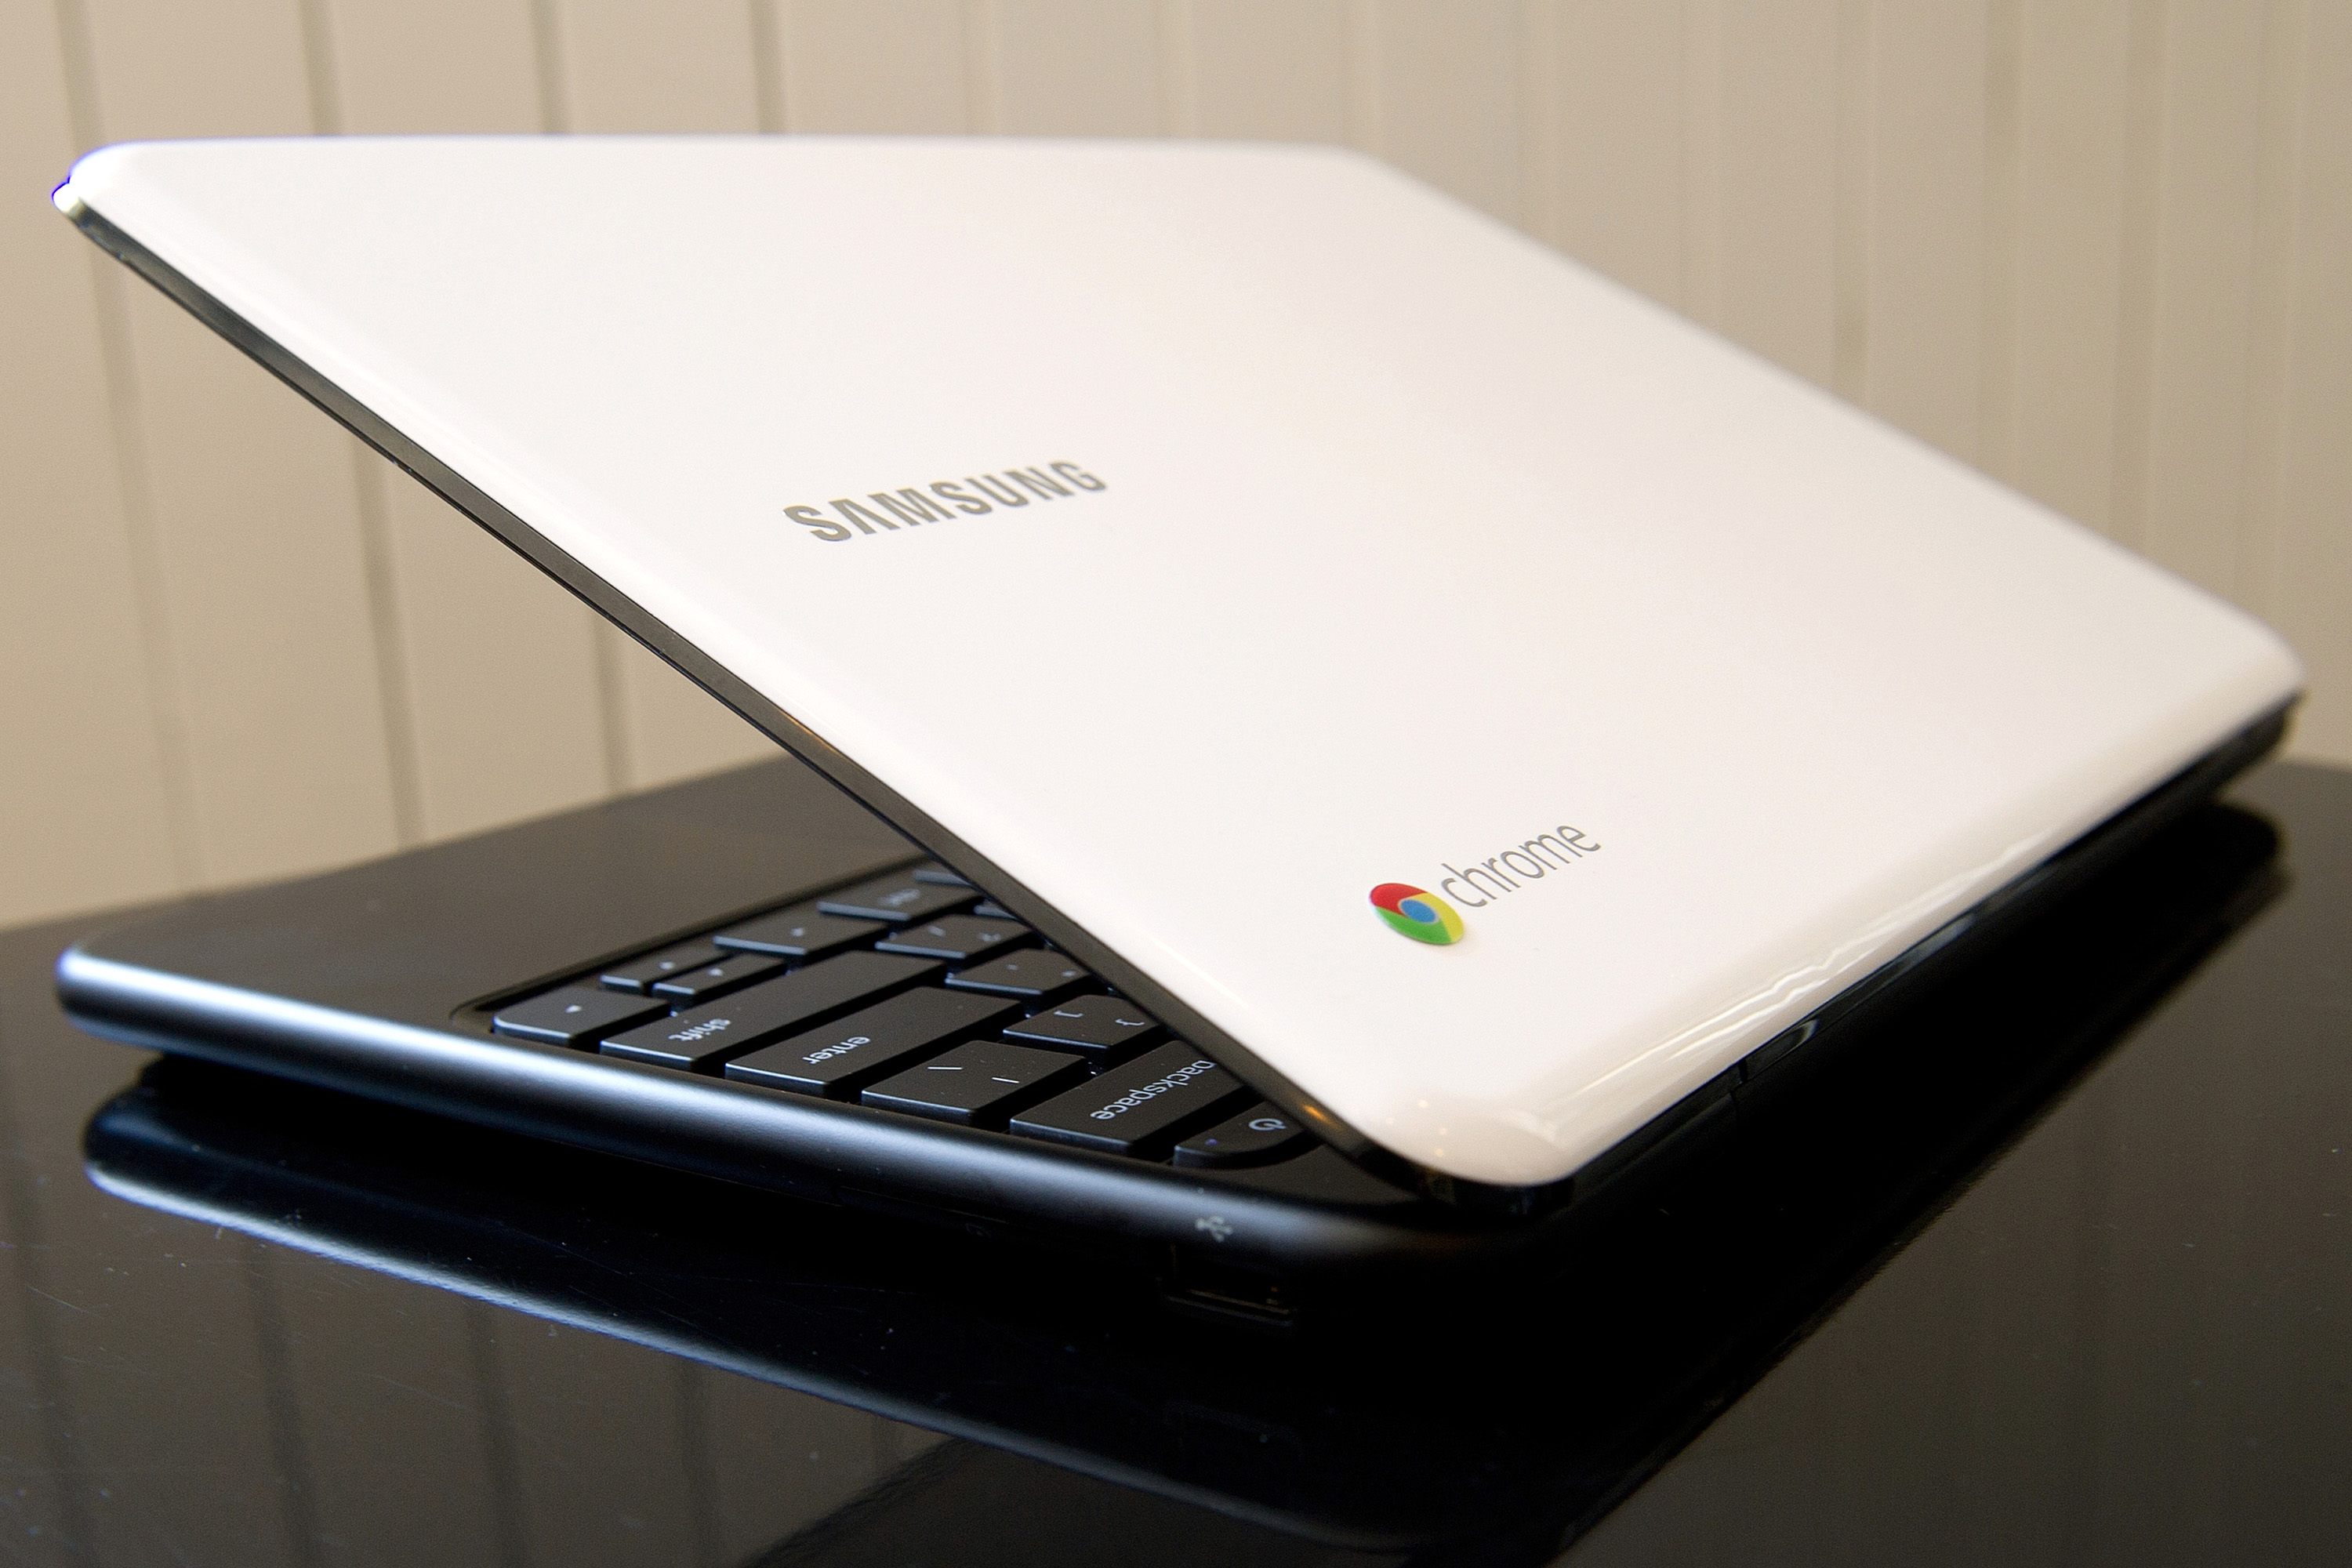 Google Chromebook To Be Available Online On June 15